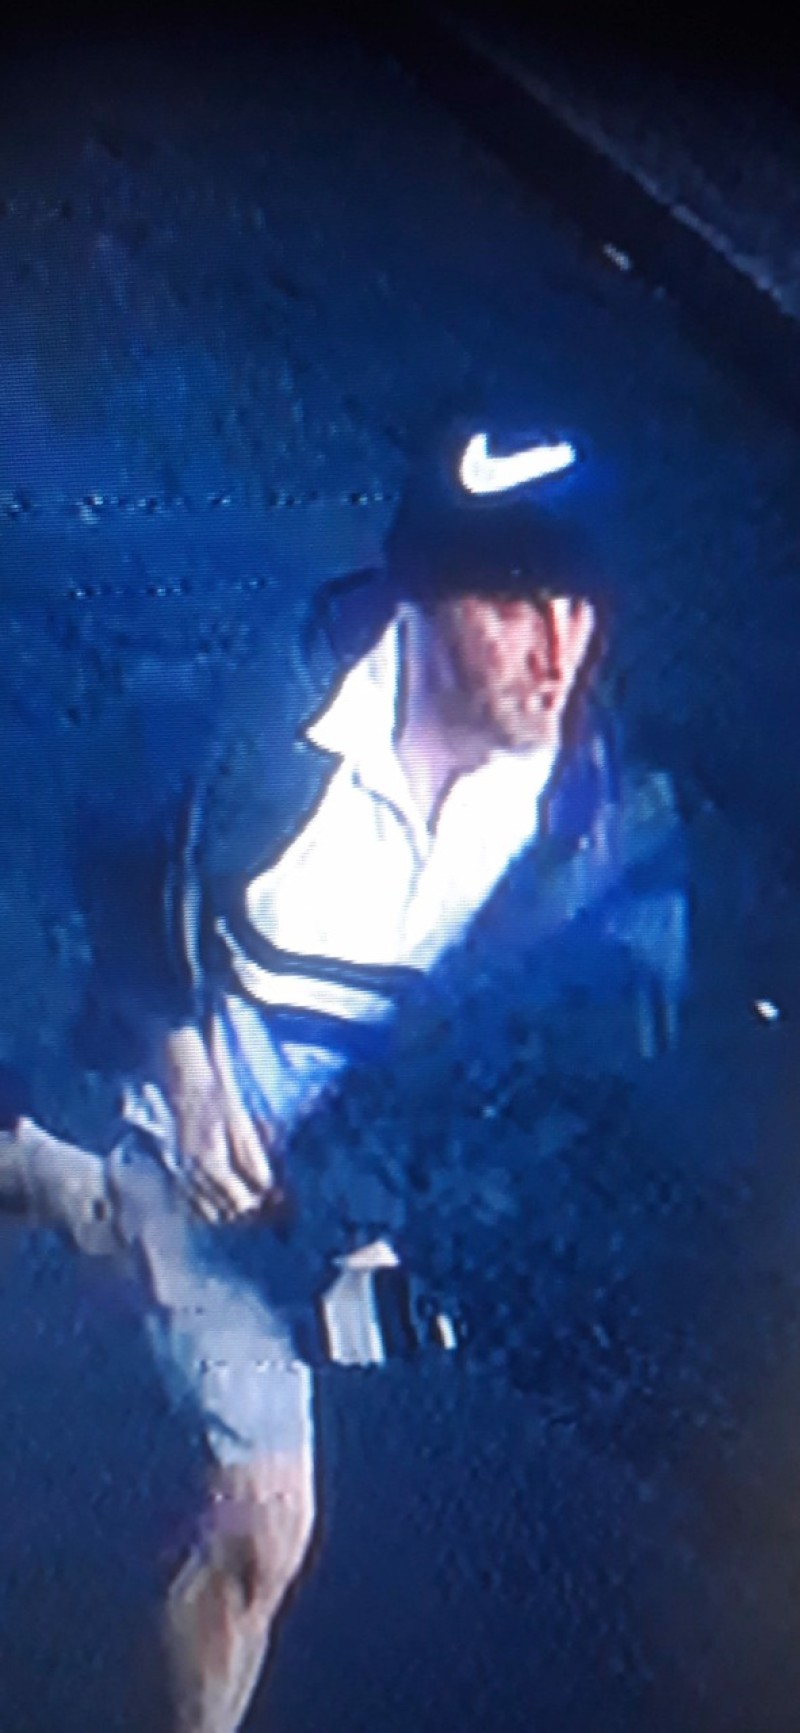 Main image for Police hunt for burglary suspect